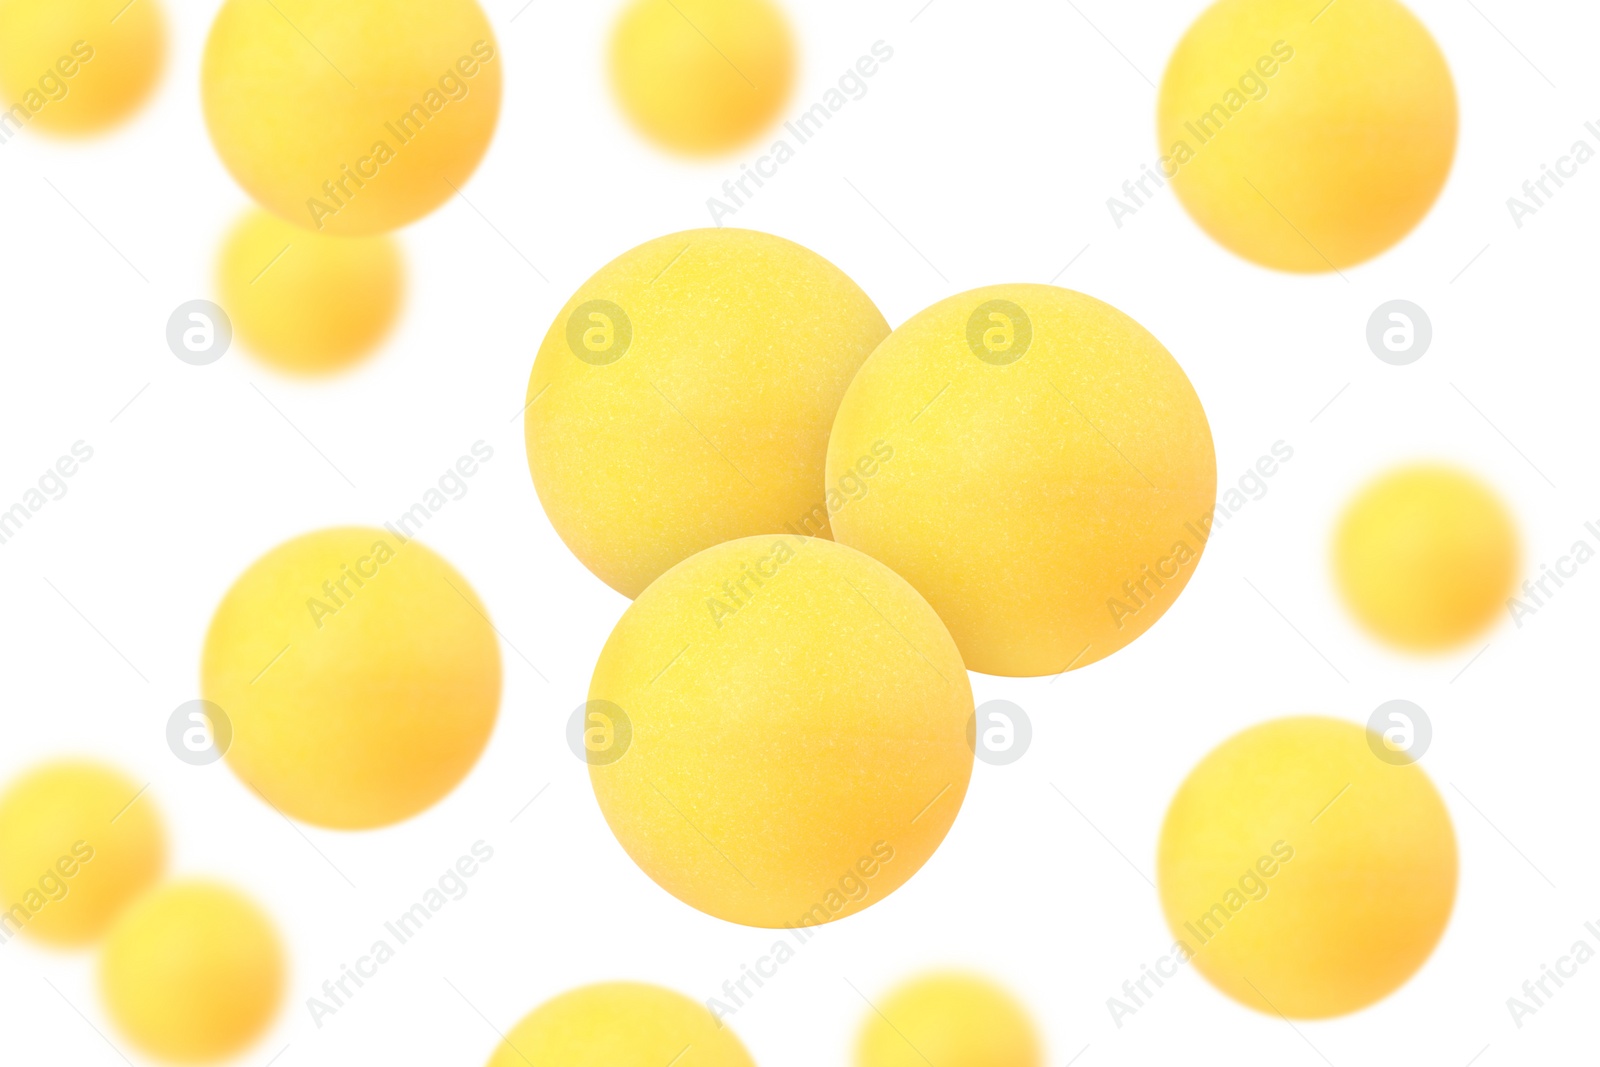 Image of Many table tennis balls flying on white background